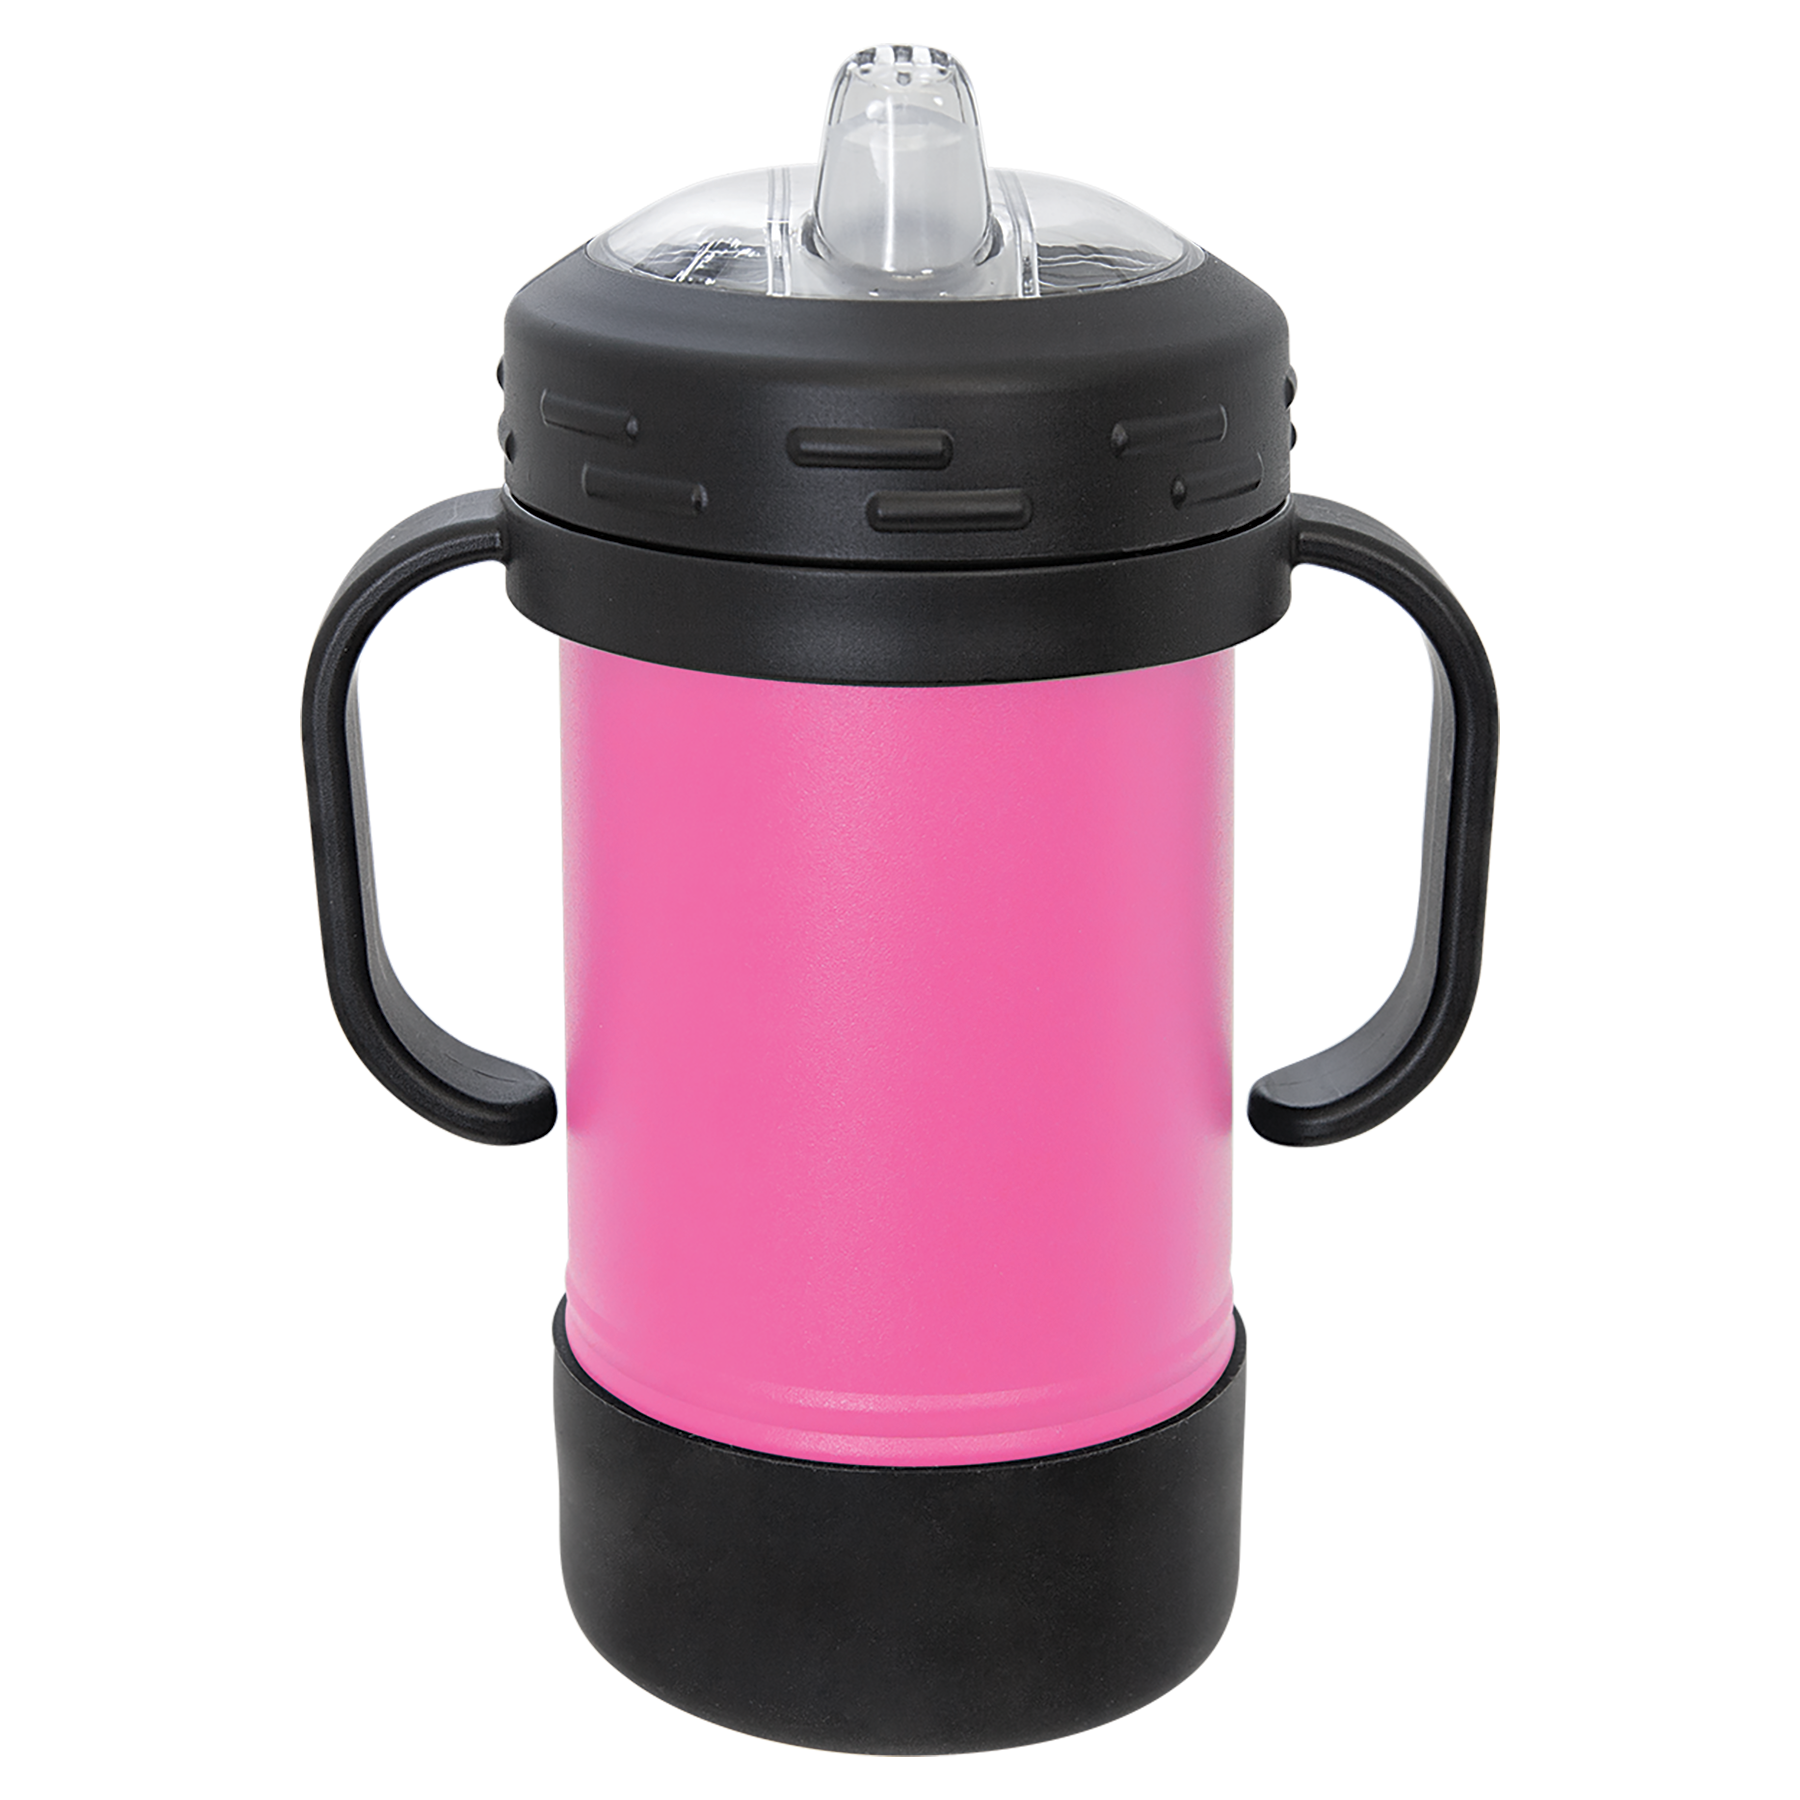 Pink 10oz Sippy Cup -One Free Engraving -Double-wall Vacuum Insulated -Made from 18/8 Gauge Stainless Steel (Type 304 Food Grade) -Lid is BPA Free (Hand Wash Only) -Removable Handles & Silicone Boot -Screw on Lid with Rubber Leak Resistant valve -Not recommended for Dishwasher -8 Color Options -Perfect for Personalized Gifts, Awards, Incentives, Swag & Fundraisers